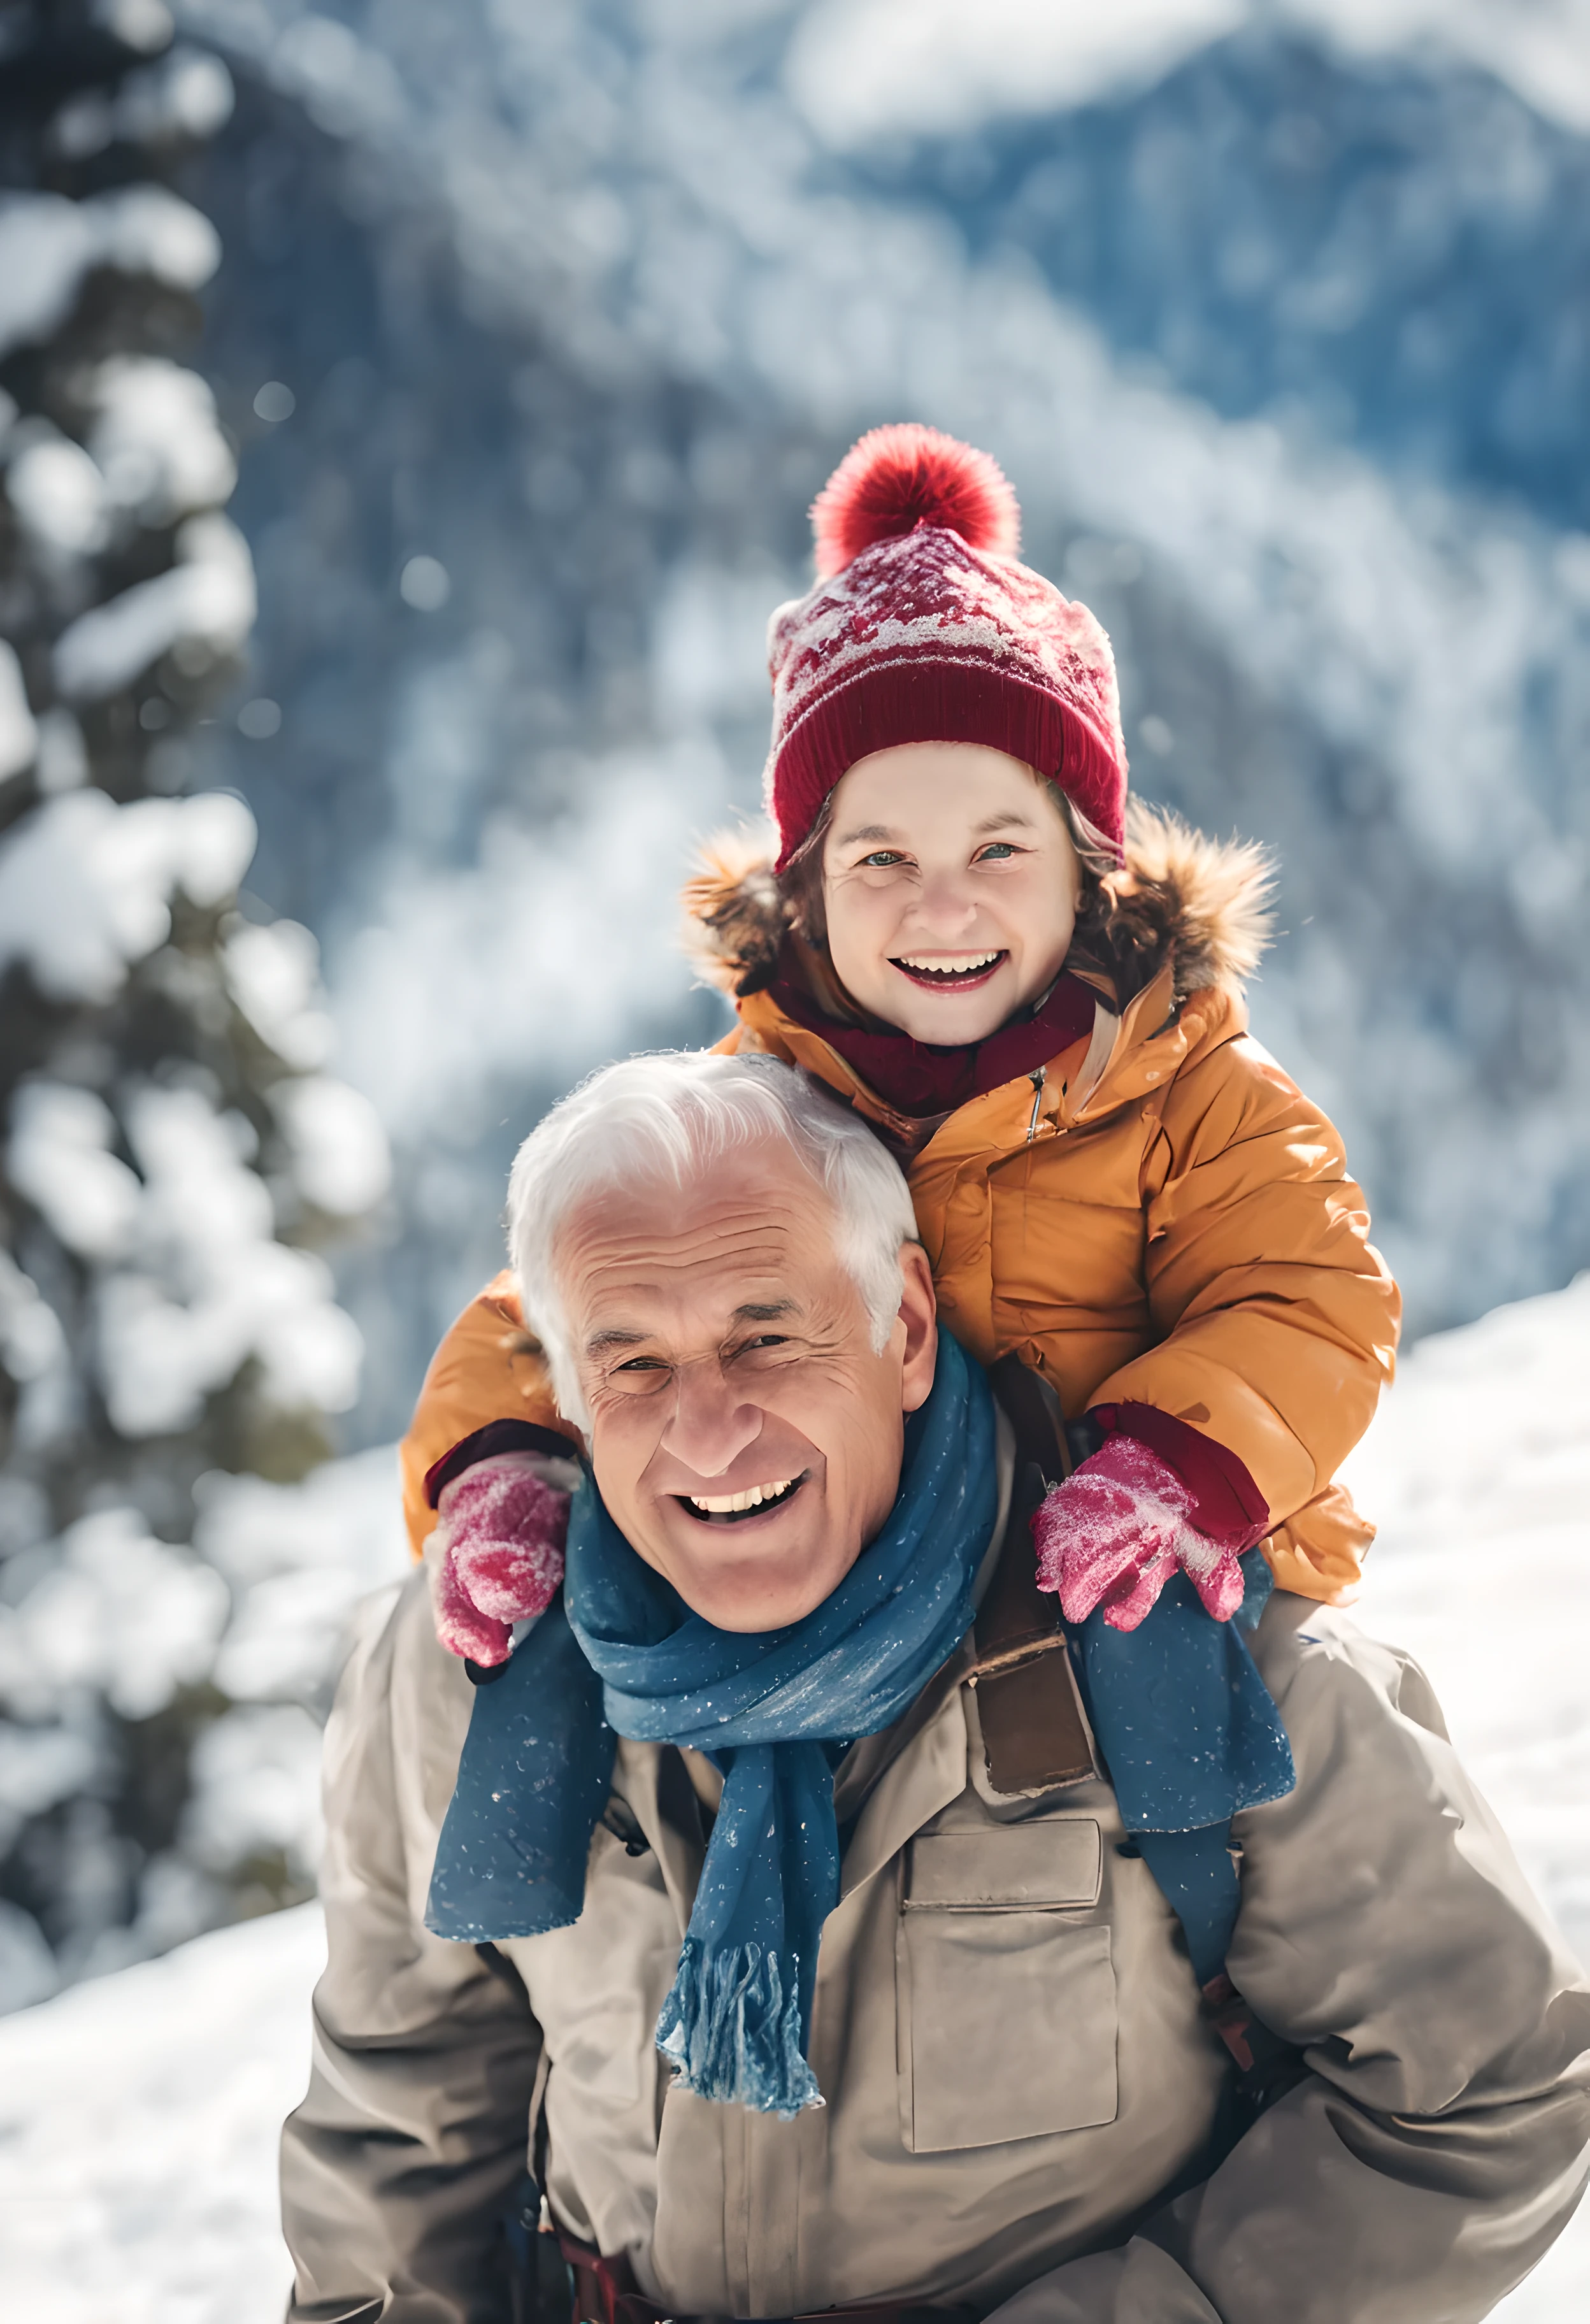 (best quality,4k,8k,highres,masterpiece:1.2),ultra-detailed,(realistic,photorealistic,photo-realistic:1.37),close-up shot of a grandfather with his granddaughter on his shoulders laughing while walking on the snow, alpine scenery, detailed scene, 1girl, snowy landscape, snowy mountains, snowy pine trees, winter wonderland, joyful atmosphere, bright sunlight, crisp air, mountains in the background, cozy winter clothing, winter boots, sunlit snowflakes, laughter in the air, happy family moment, real father and daughter, fun outdoor activity, rosy cheeks, snowy footprints, alpine meadows, mountain peaks, magical ambiance, white winter magic.